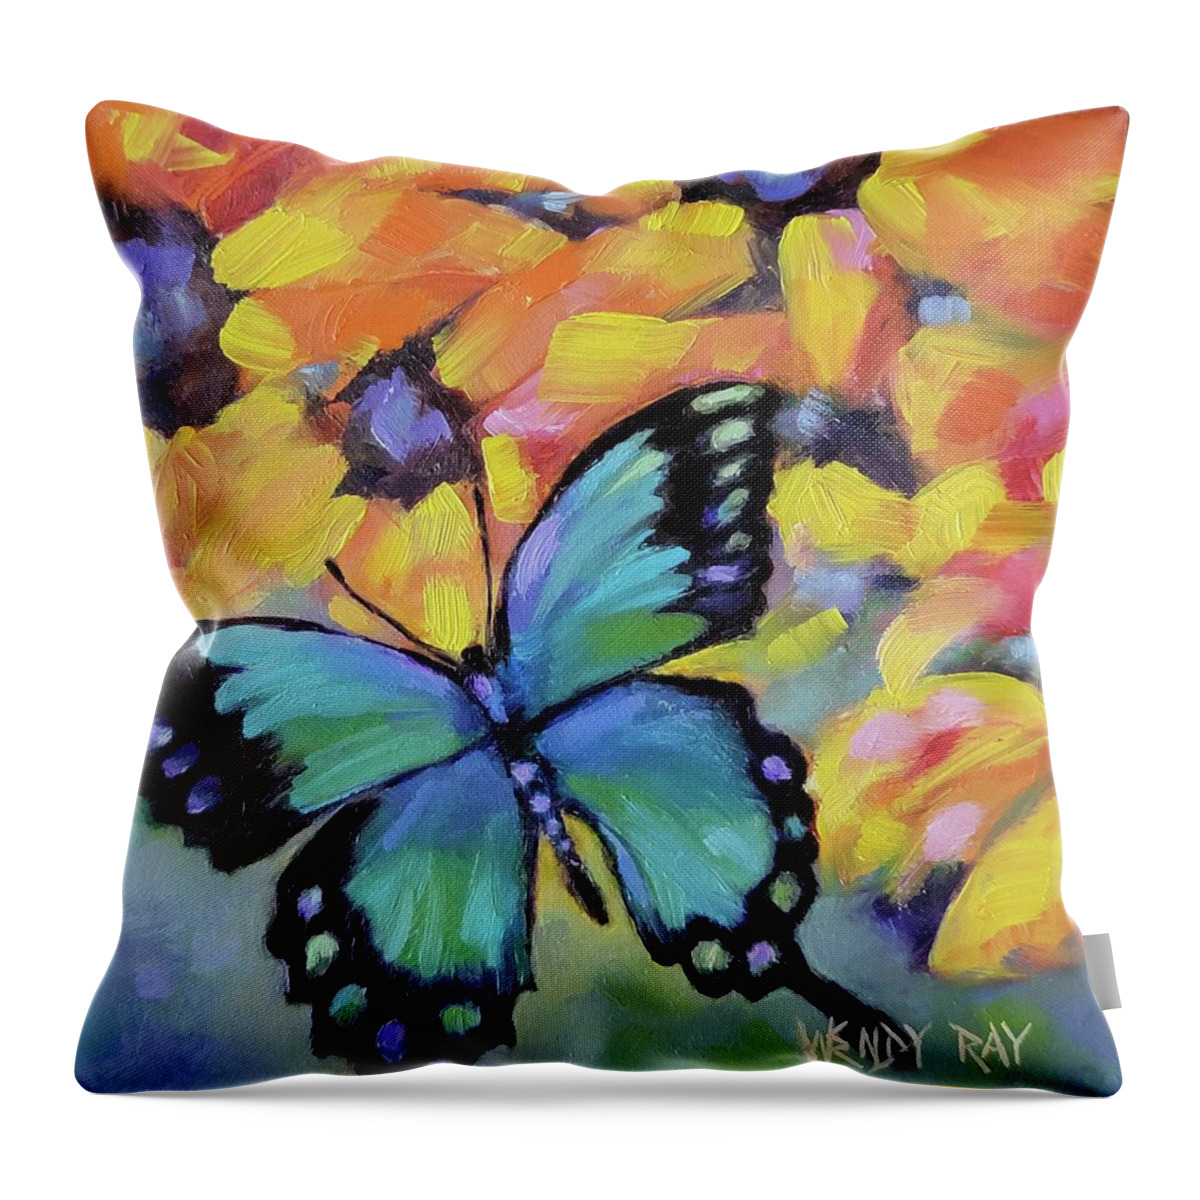 Oil Throw Pillow featuring the painting Wings of Spring by Wendy Ray